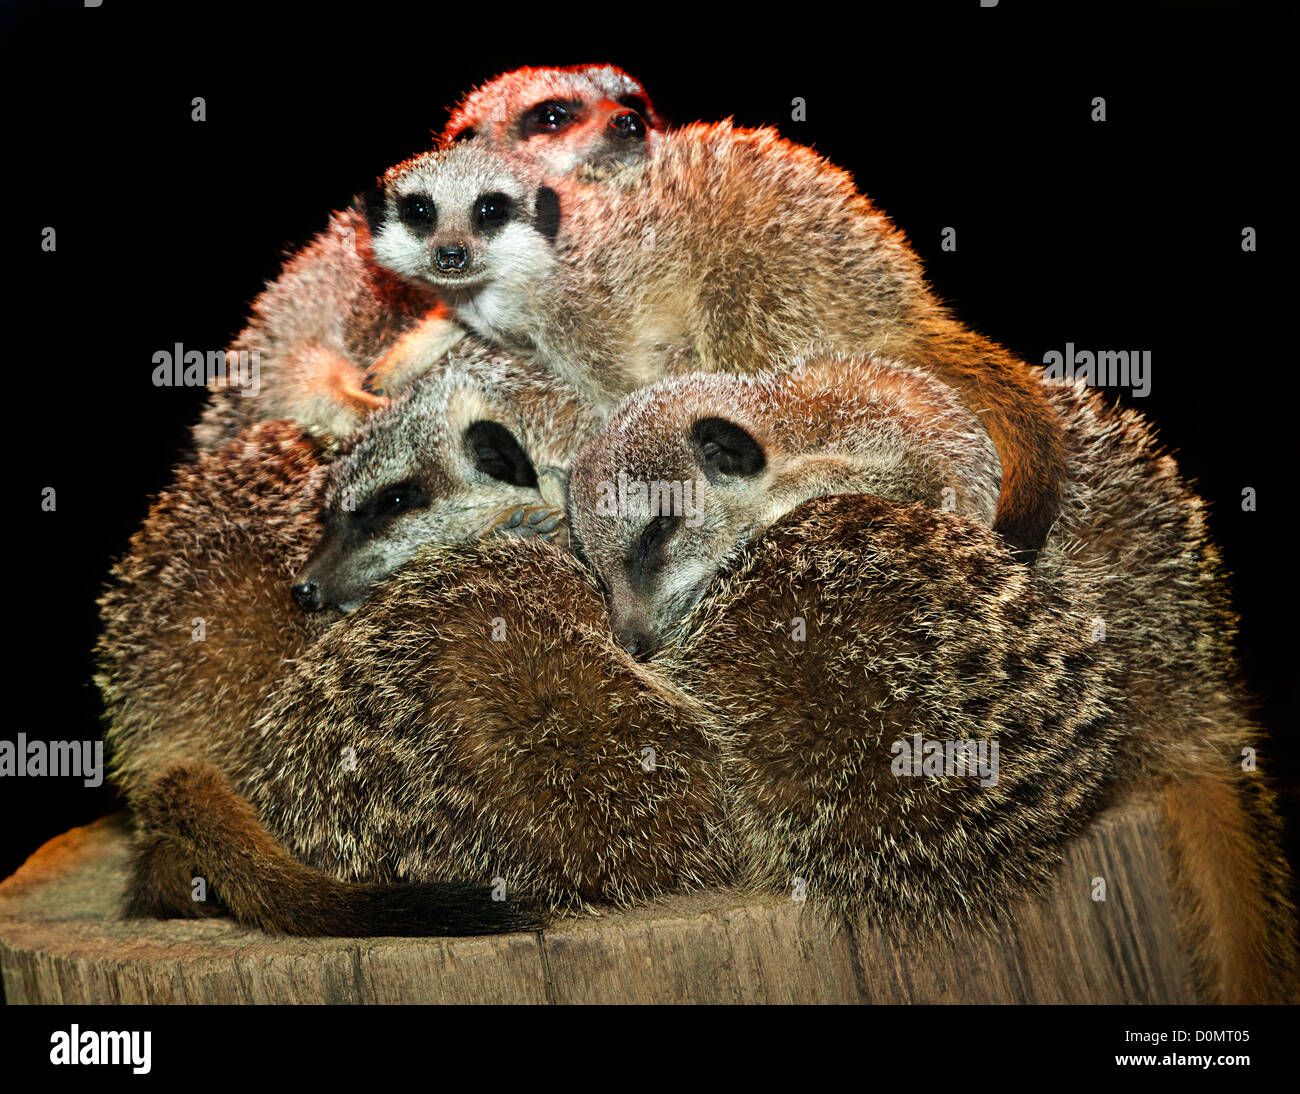 Captive Slender tailed meercats huddled for warmth under an infra red lamp, Durrell Wildlife Centre, Jersey, UK Stock Photo